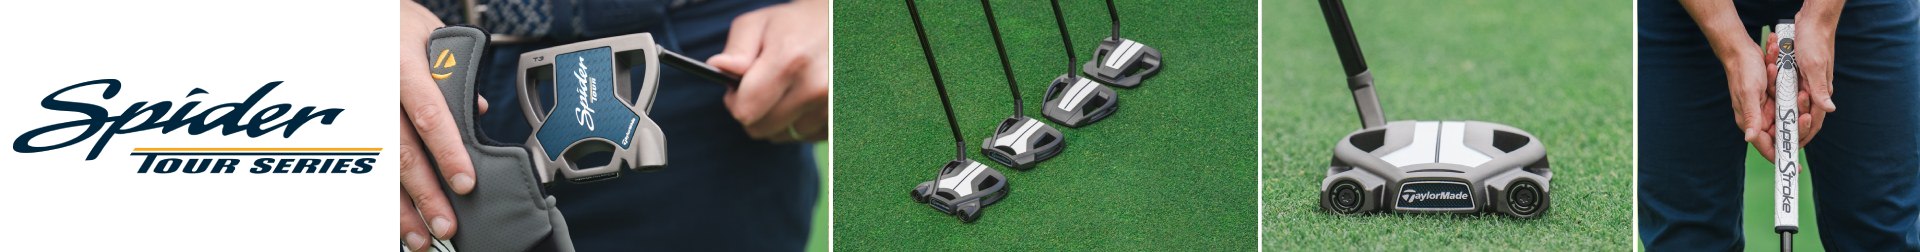 Gamme putters Spider Tour Series TaylorMade